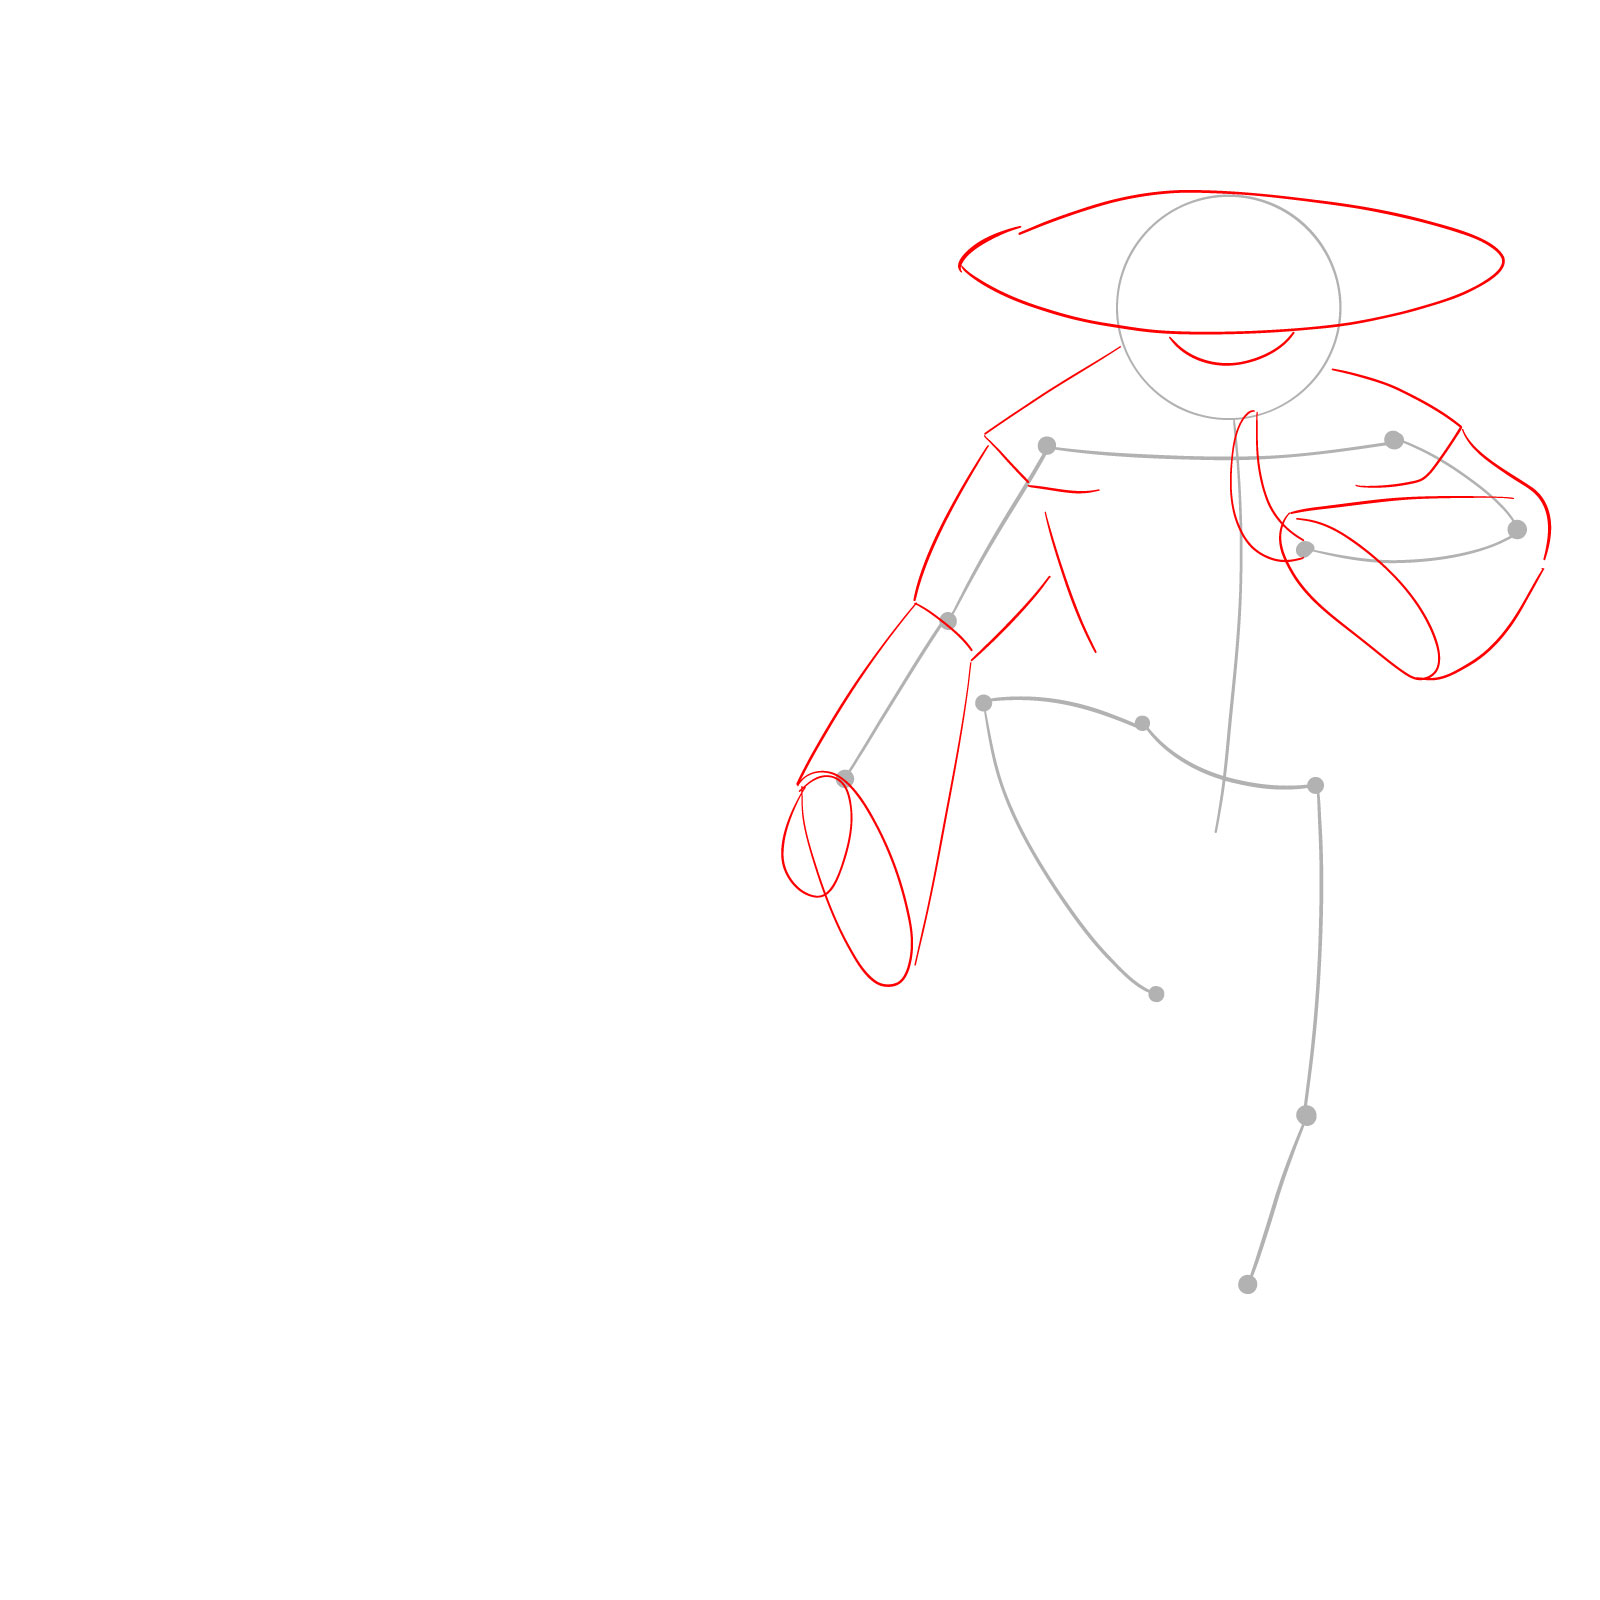 How to draw Temple Jax from League of Legends - step 02